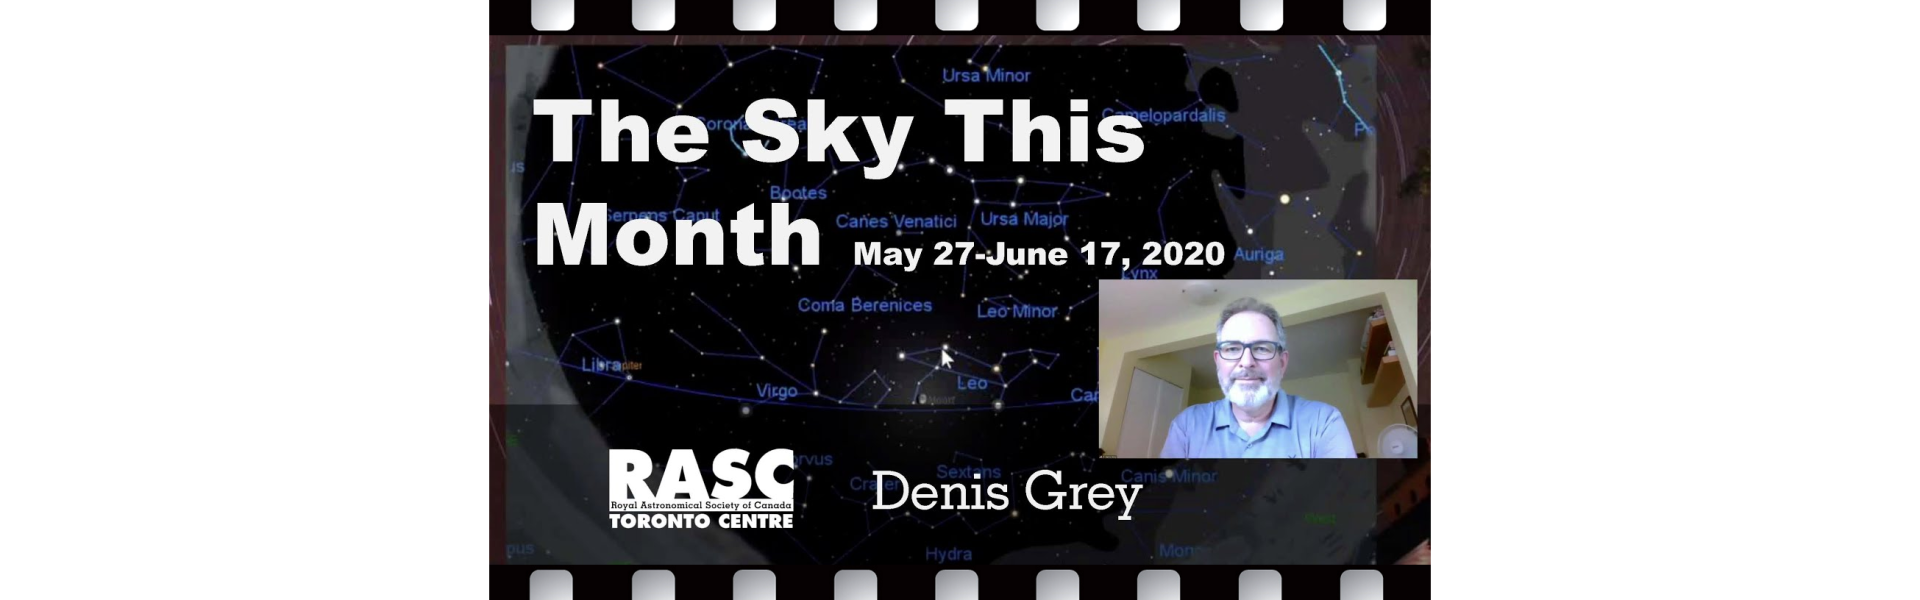 The Sky This Month for June 2020